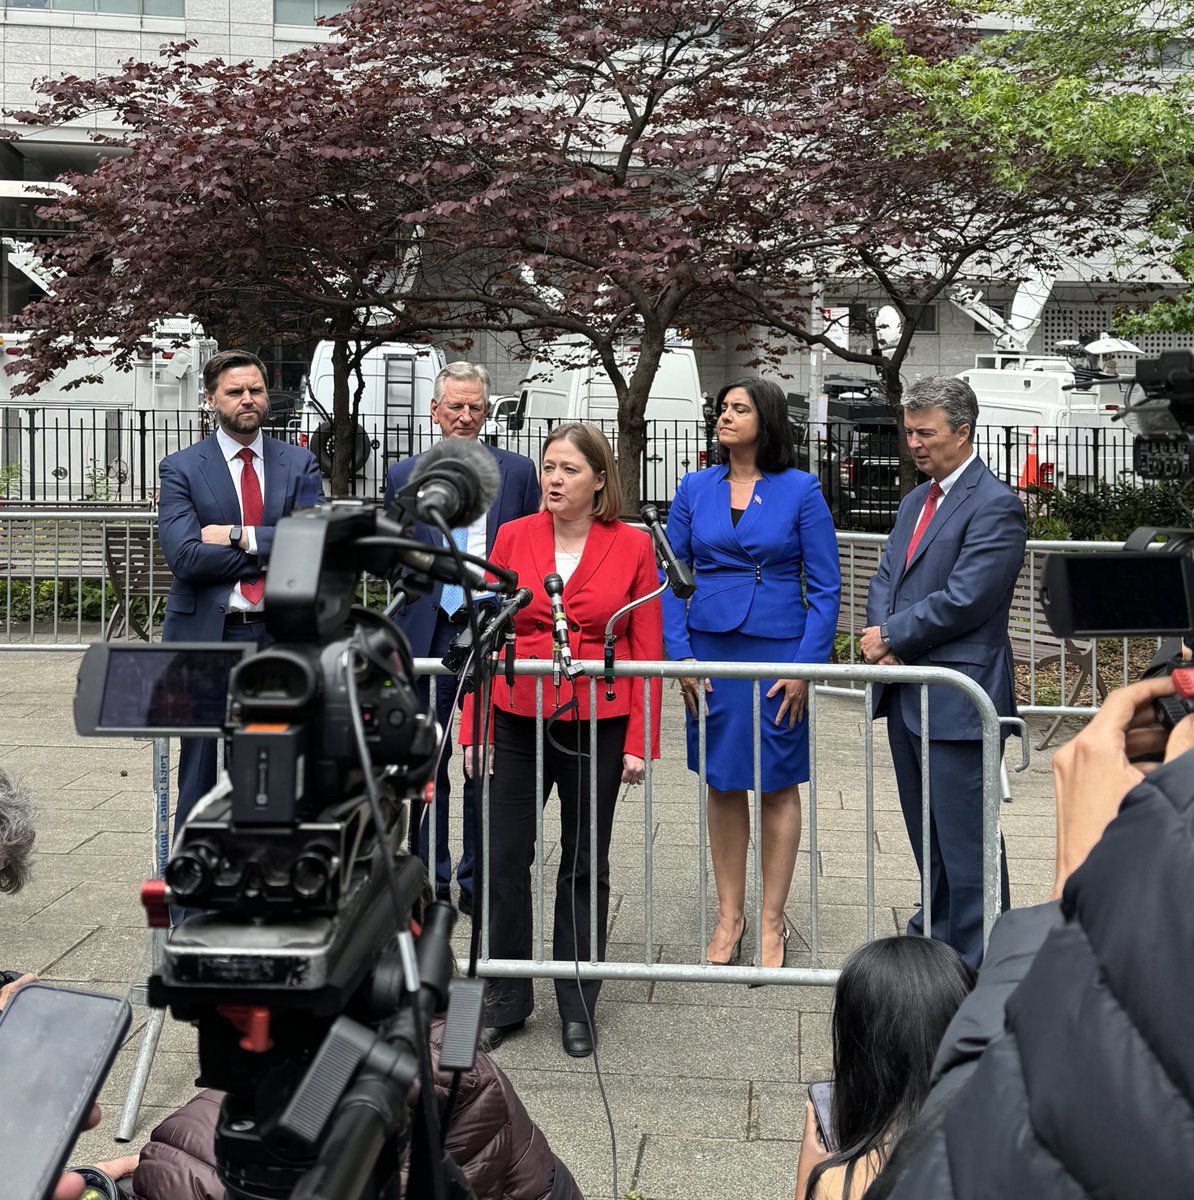 Politics has no place in a criminal prosecution. I am glad to stand with President @realDonaldTrump in NY today in opposition to the lawfare being waged against him. It is clear that Biden & his far-left allies will stop at nothing to silence President Trump's voice and keep